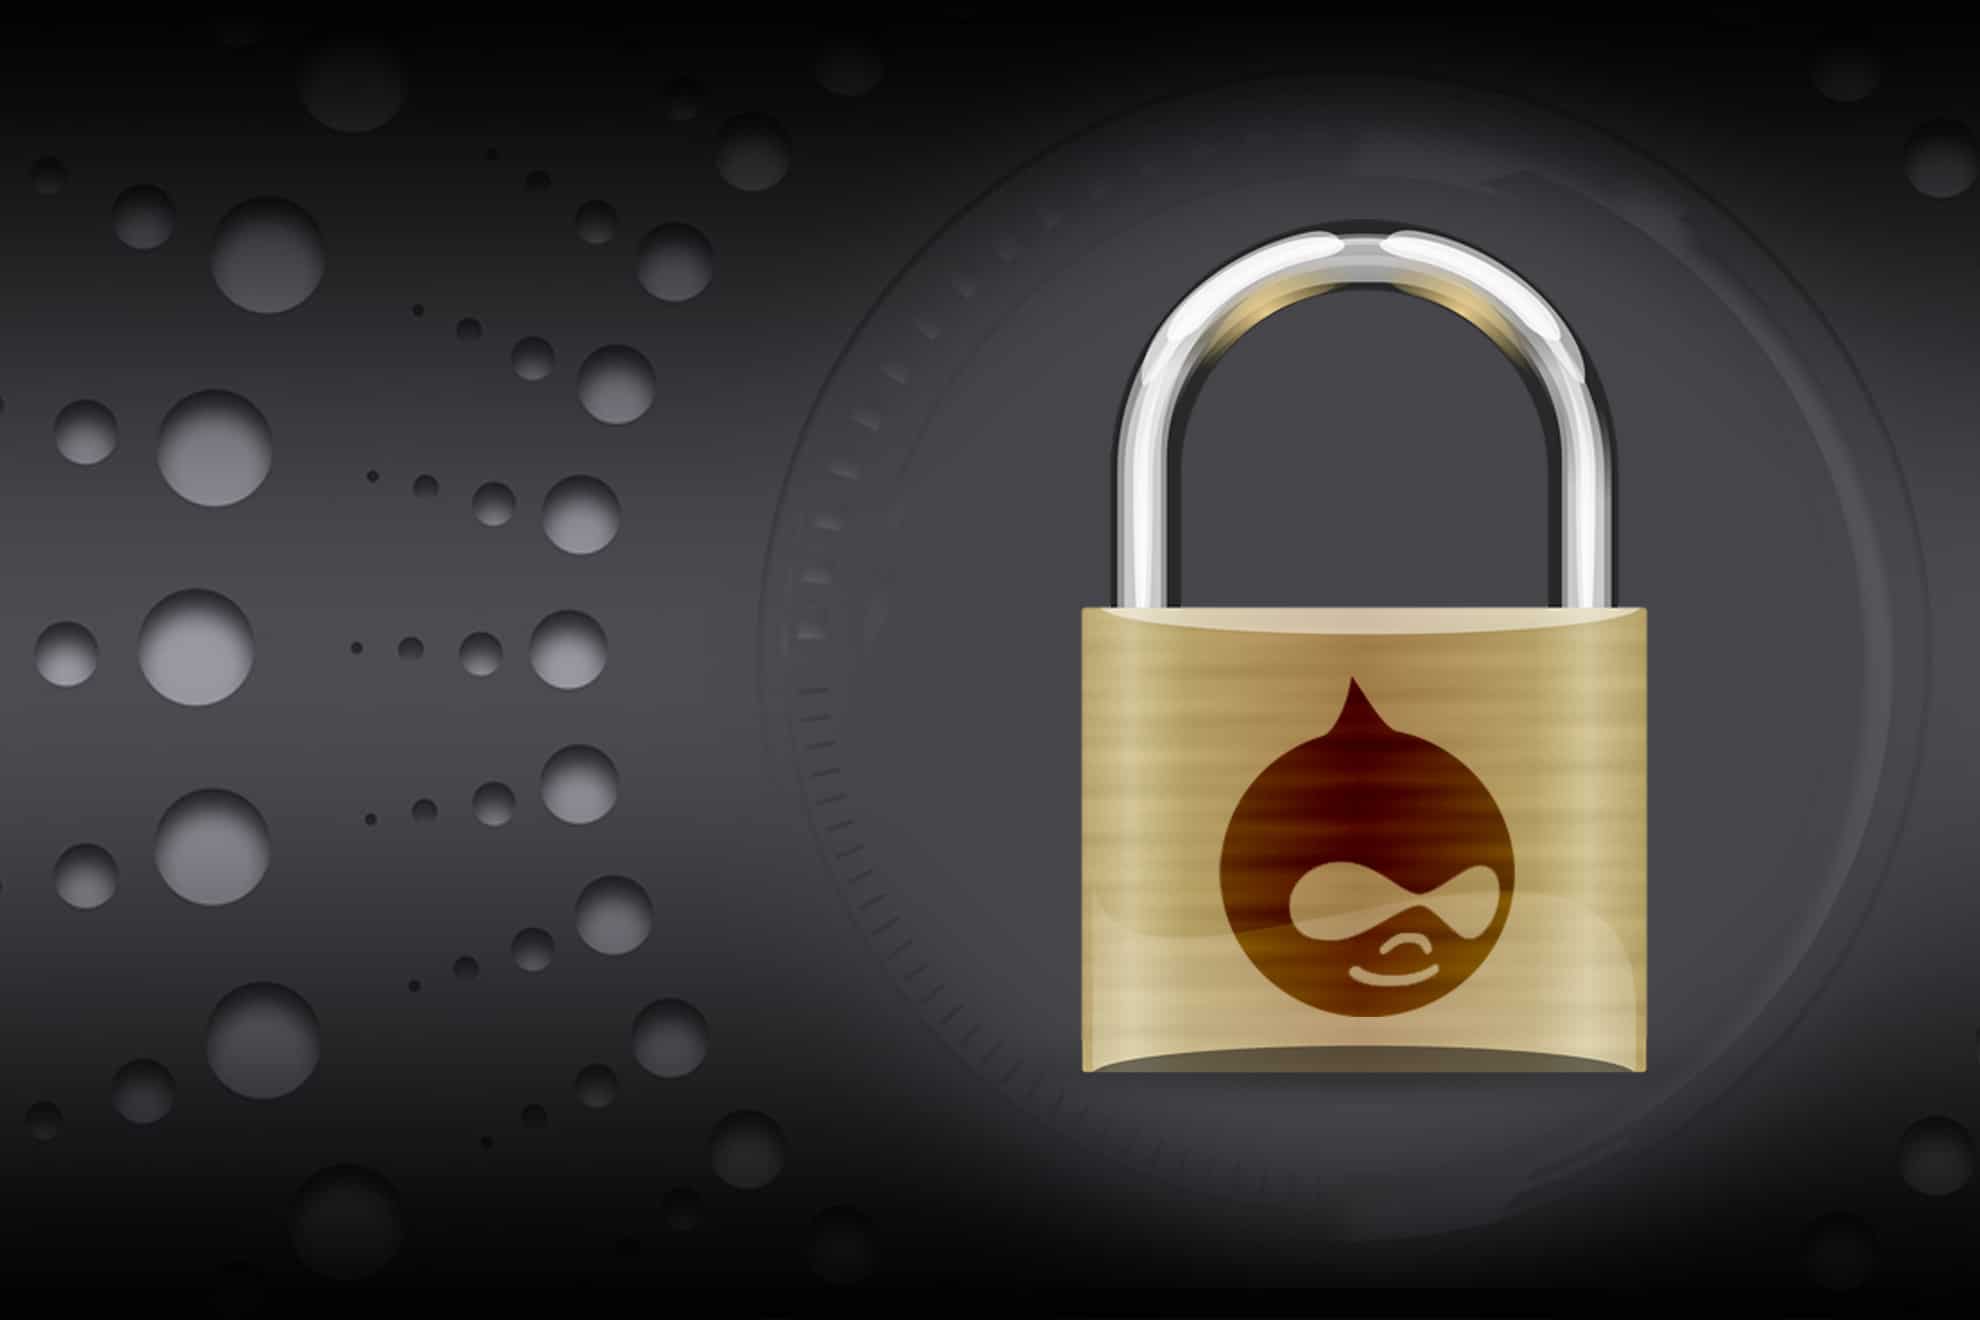 drupal 7 extended support and security updates